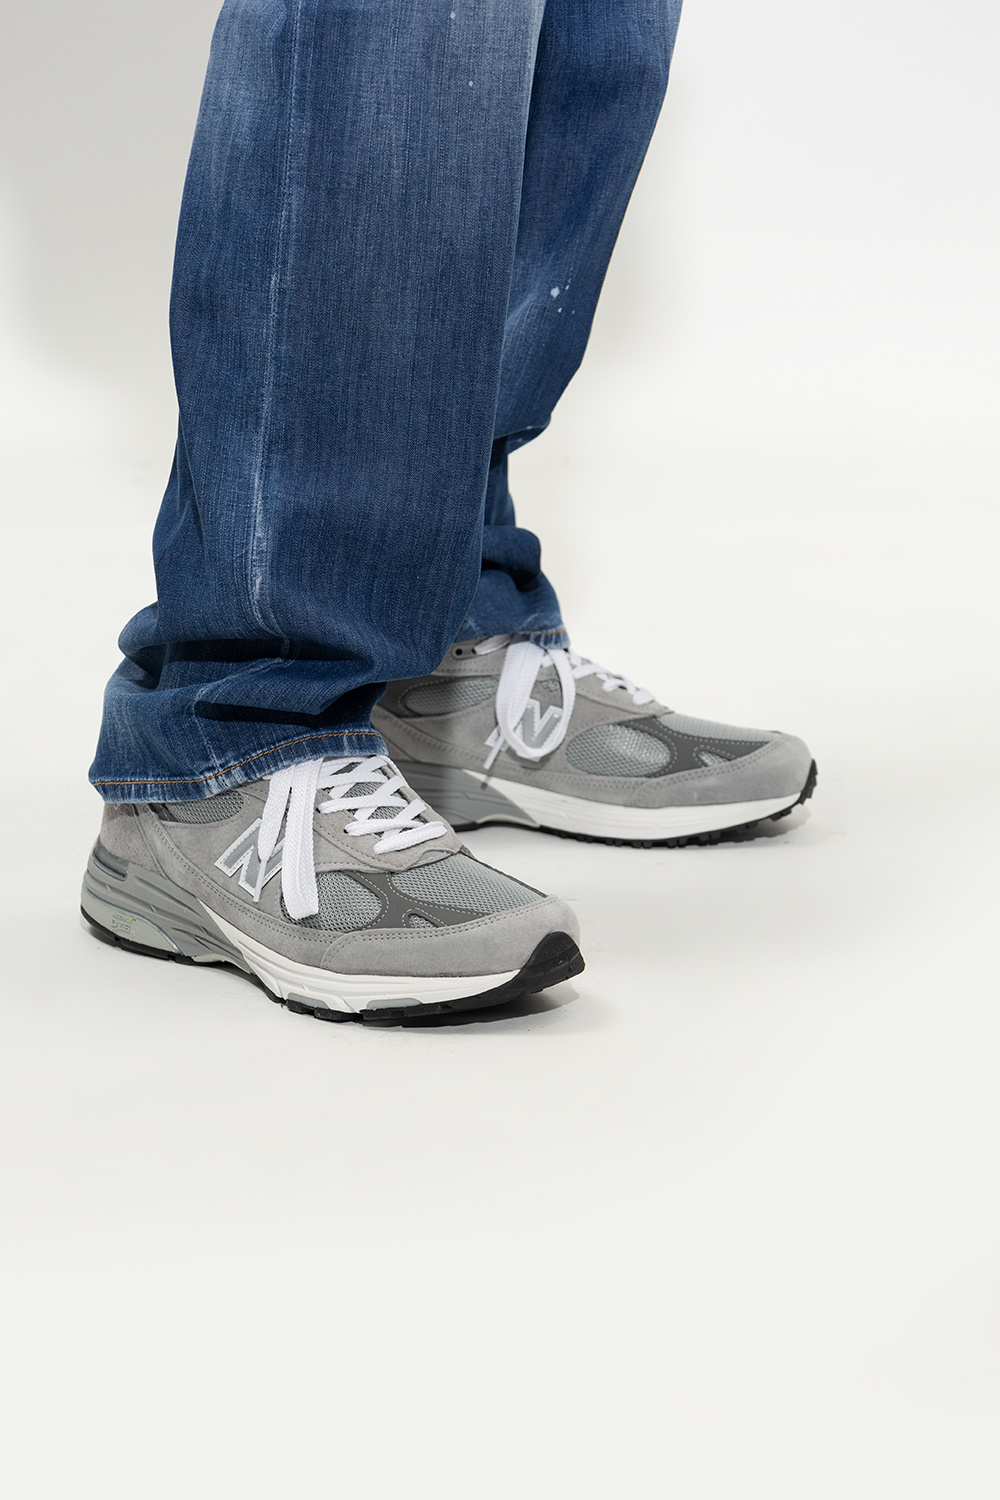 Grey 'MR993GL' sneakers from 'Made in UK' series New Balance